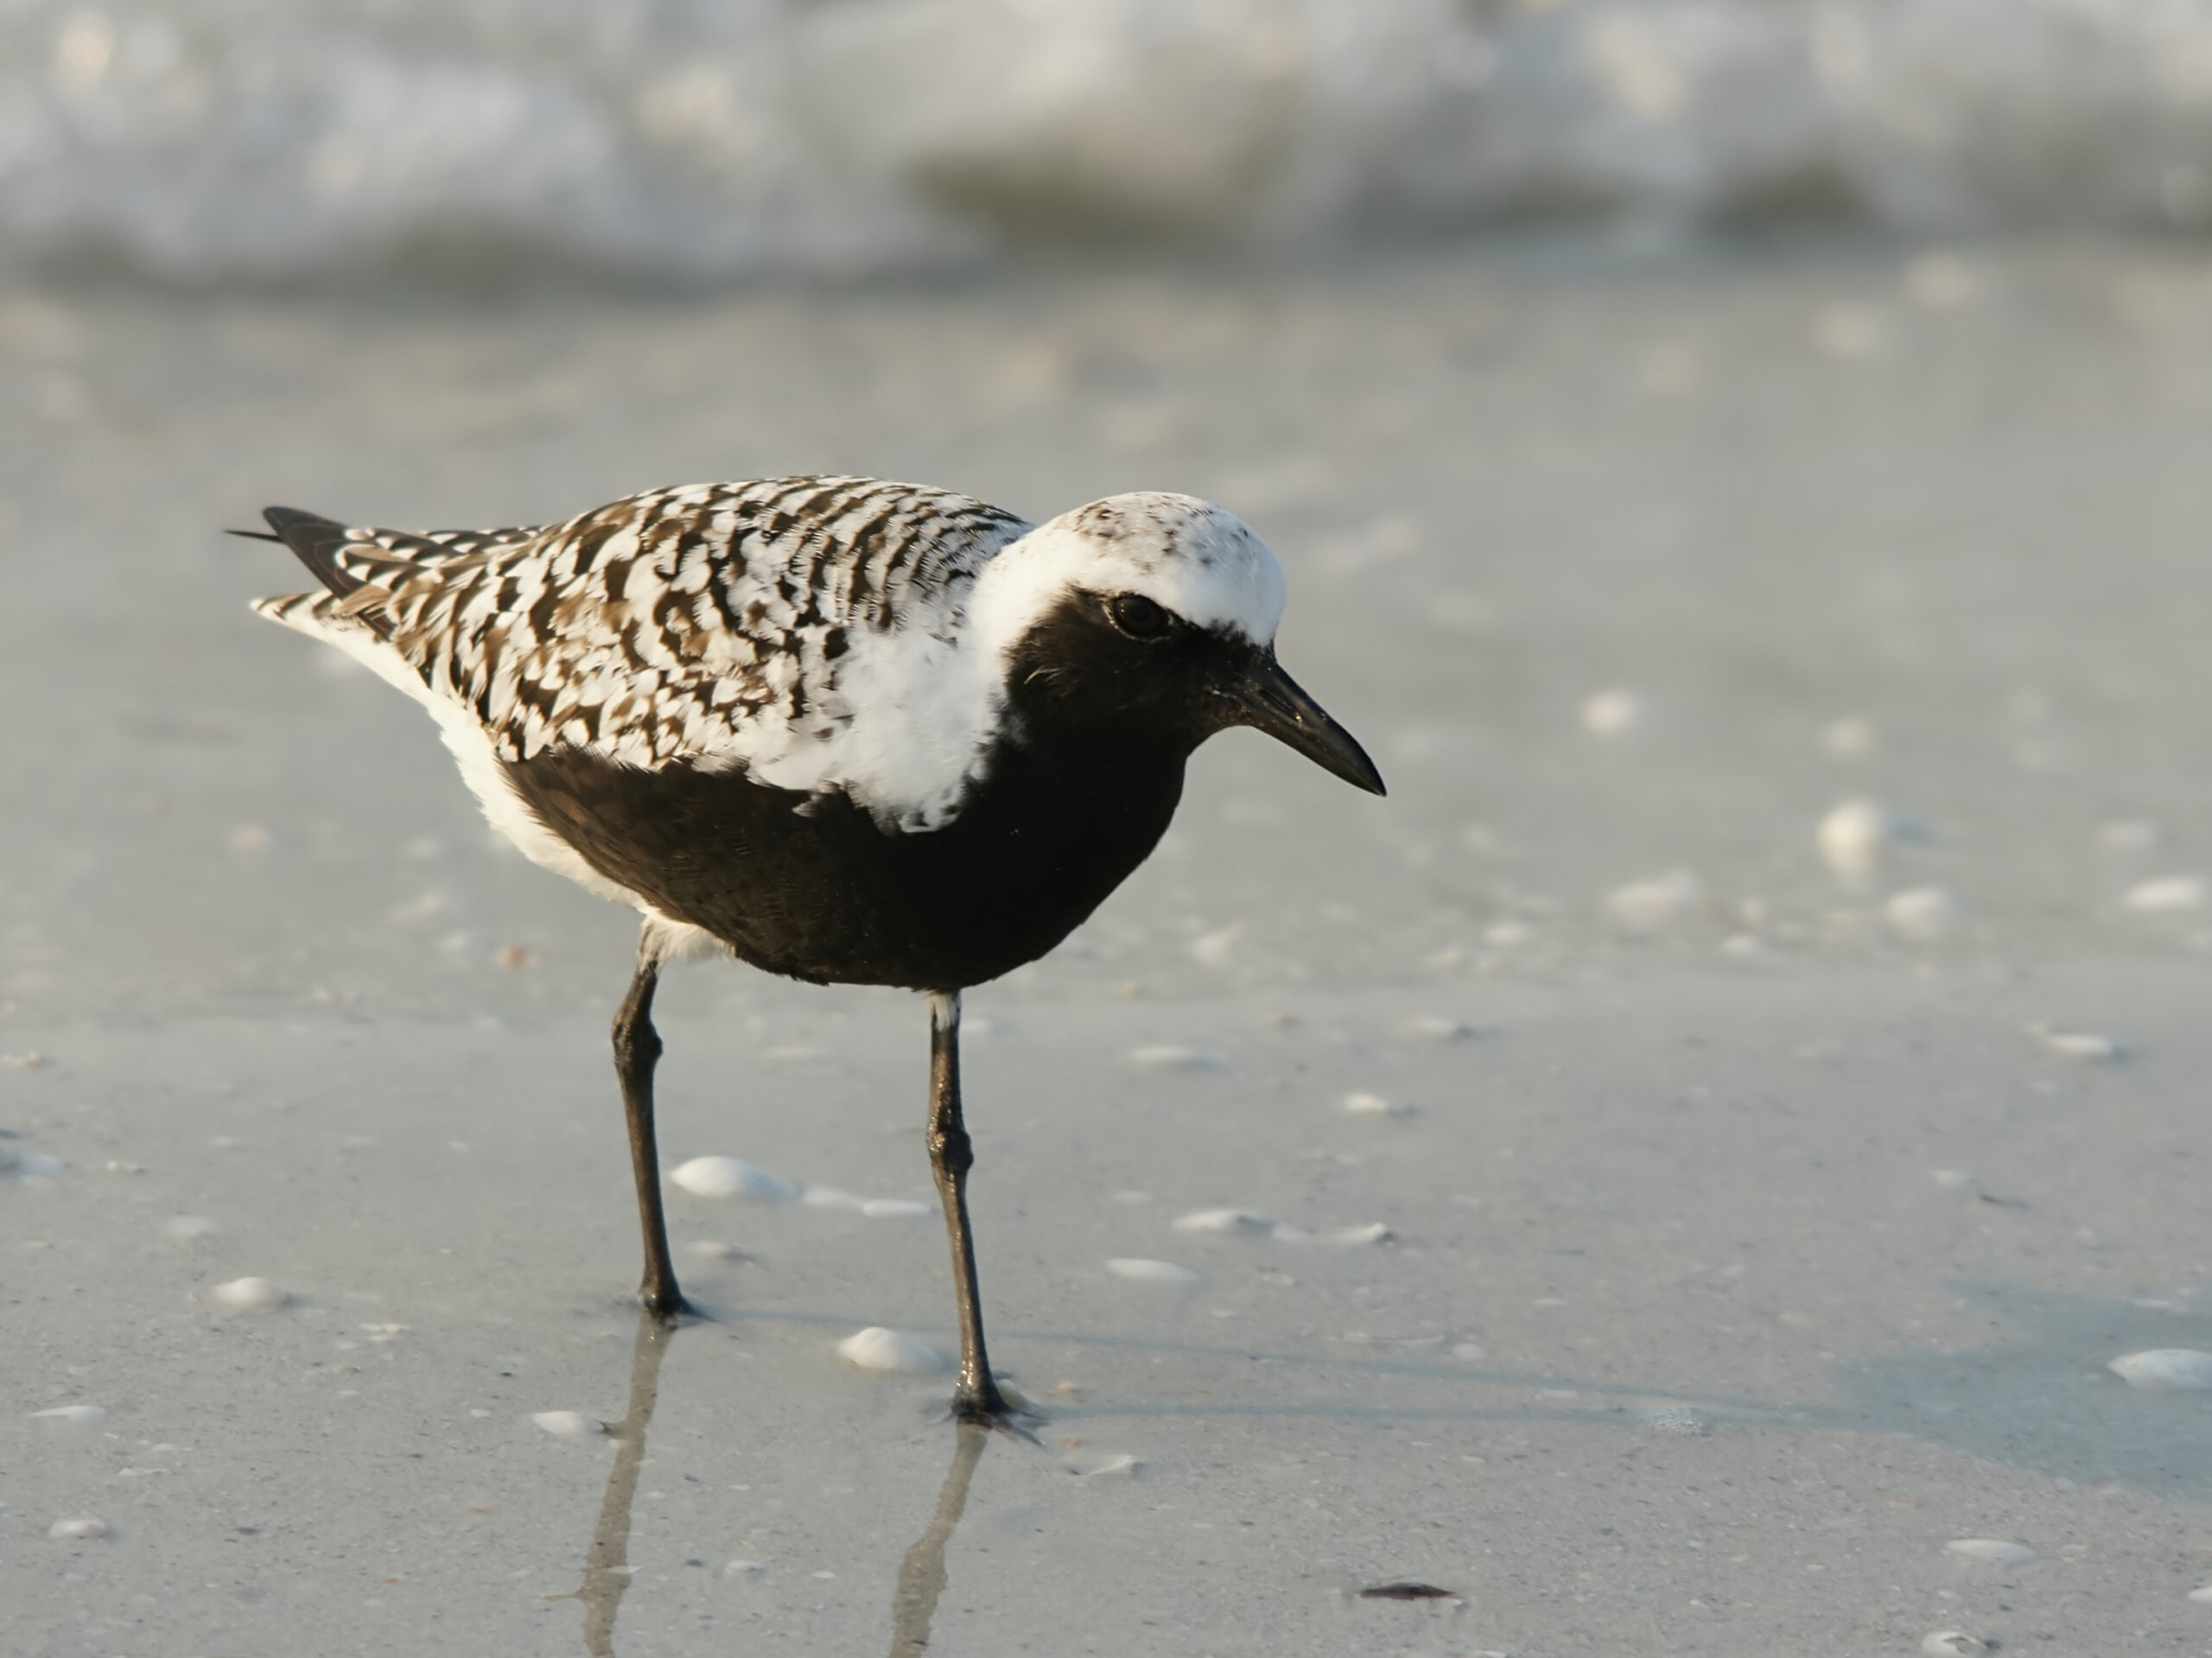 The grey plover